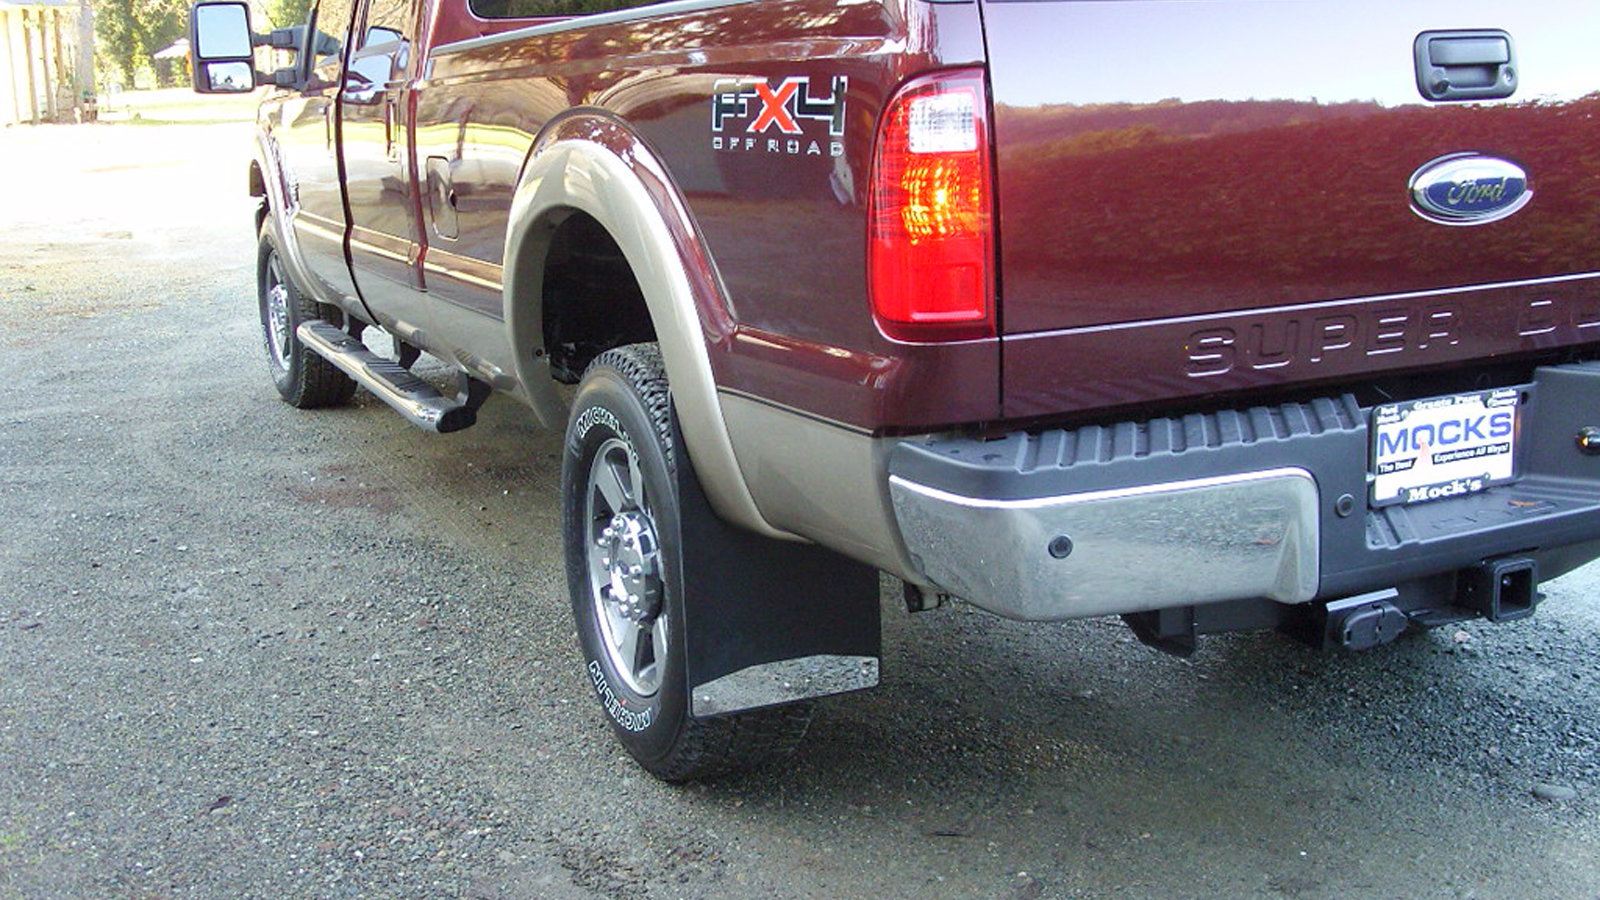 Splash Guards Mud Fender Flares Mudflaps Truck Dually for Front and Rear Wheel 4 PCS Mud Flaps Fits for Ford F-150 2021 